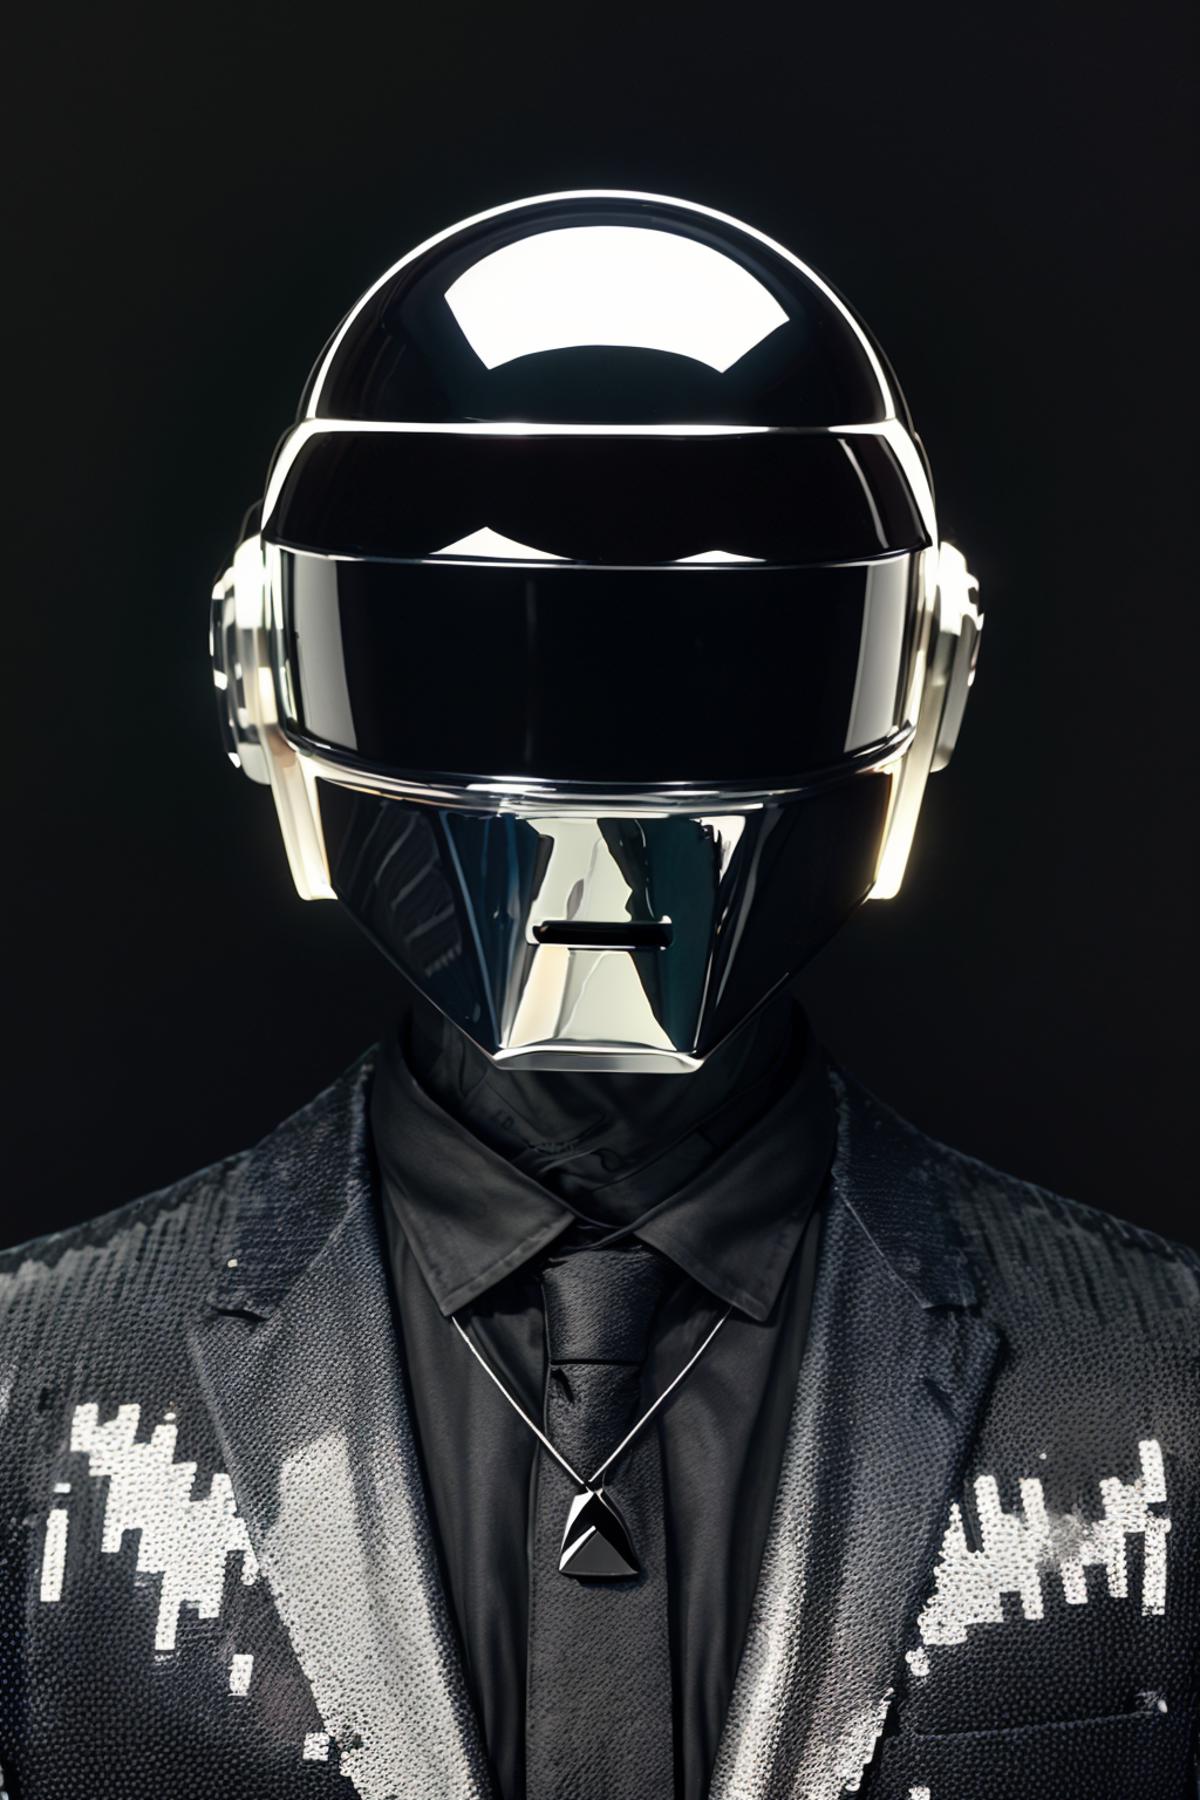 Daft Punk image by diffusiondesign